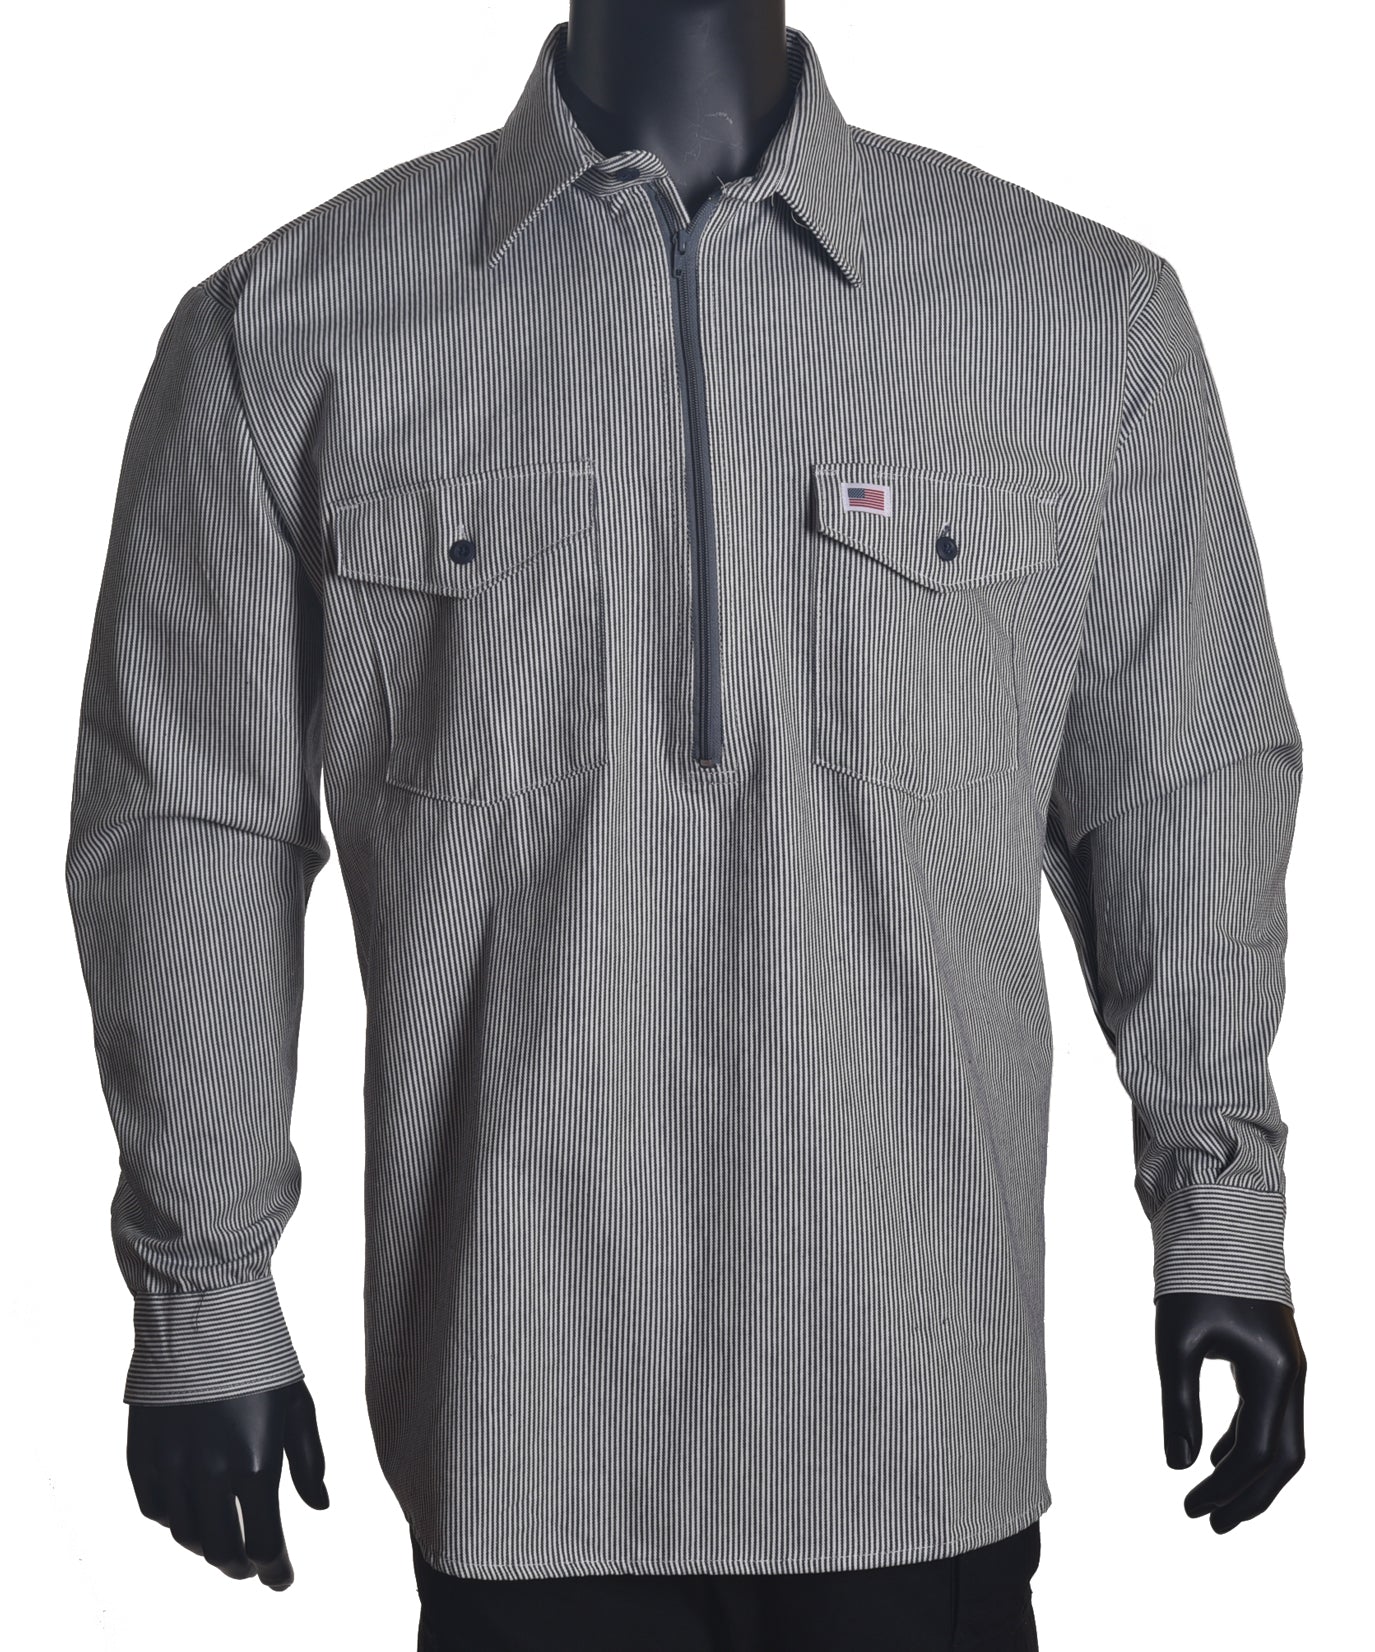 Whistle Workwear Men's Hickory Long Sleeve Button-Up Work Shirt - Work World - Workwear, Work Boots, Safety Gear